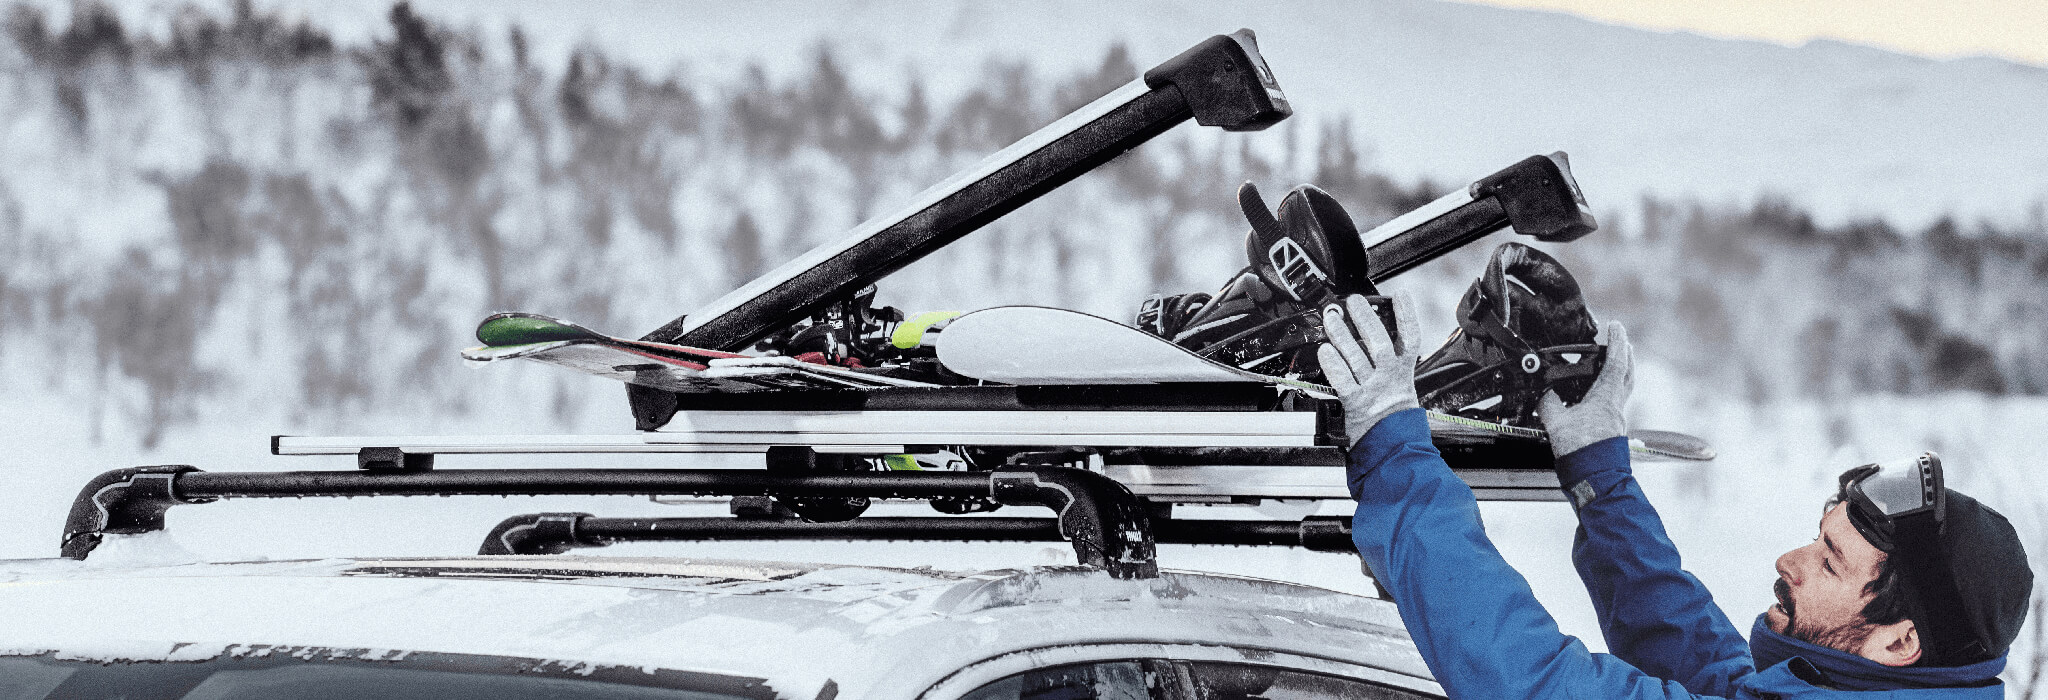 Ski and Snowboard Carrier in use